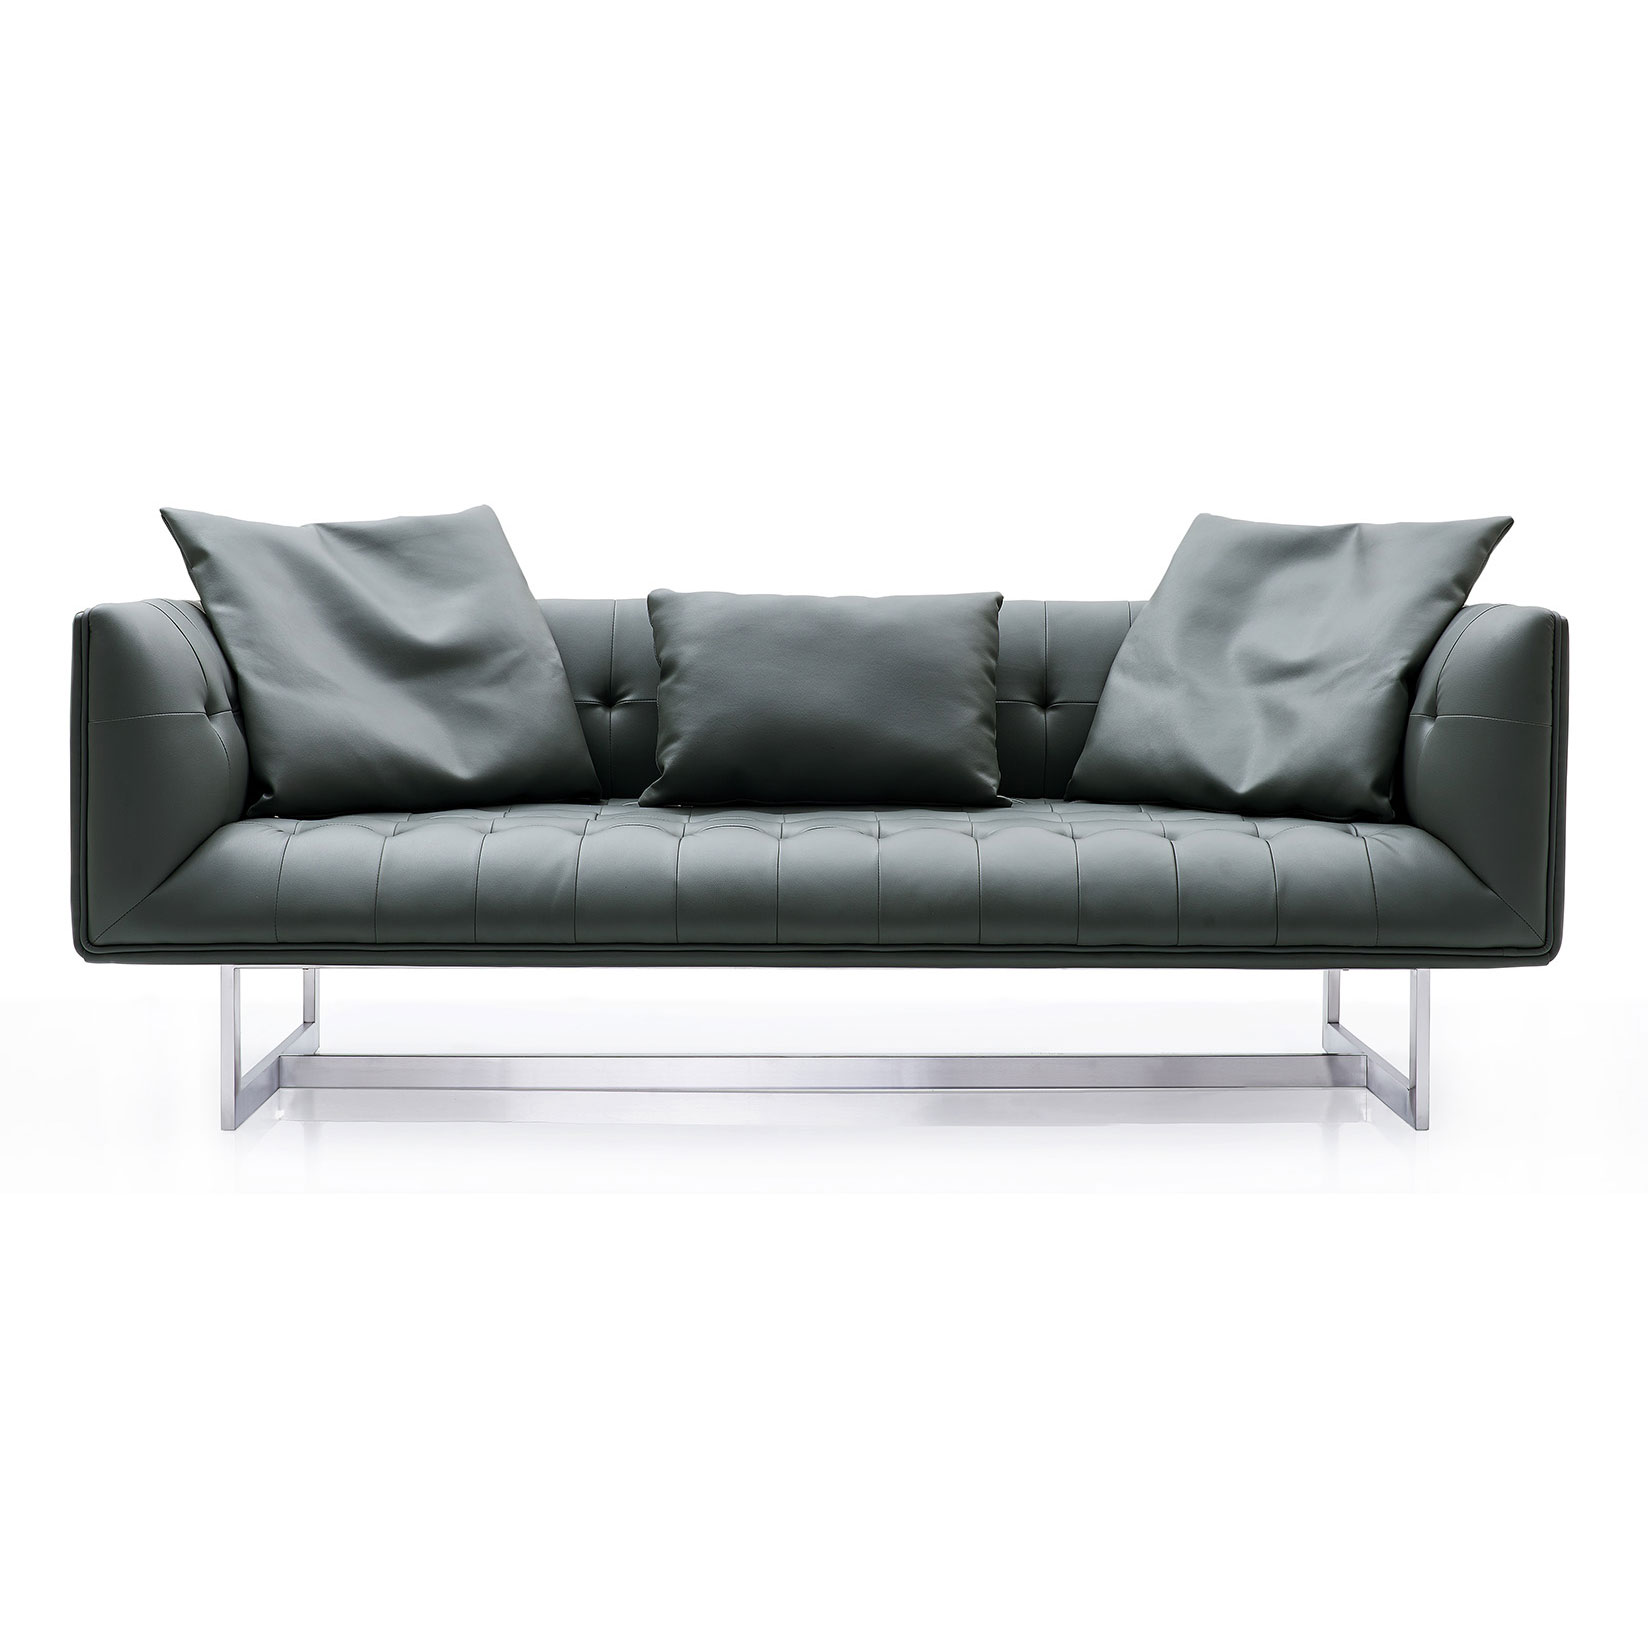 low-back capitone sofa stands on modern metal legs to complement any interior